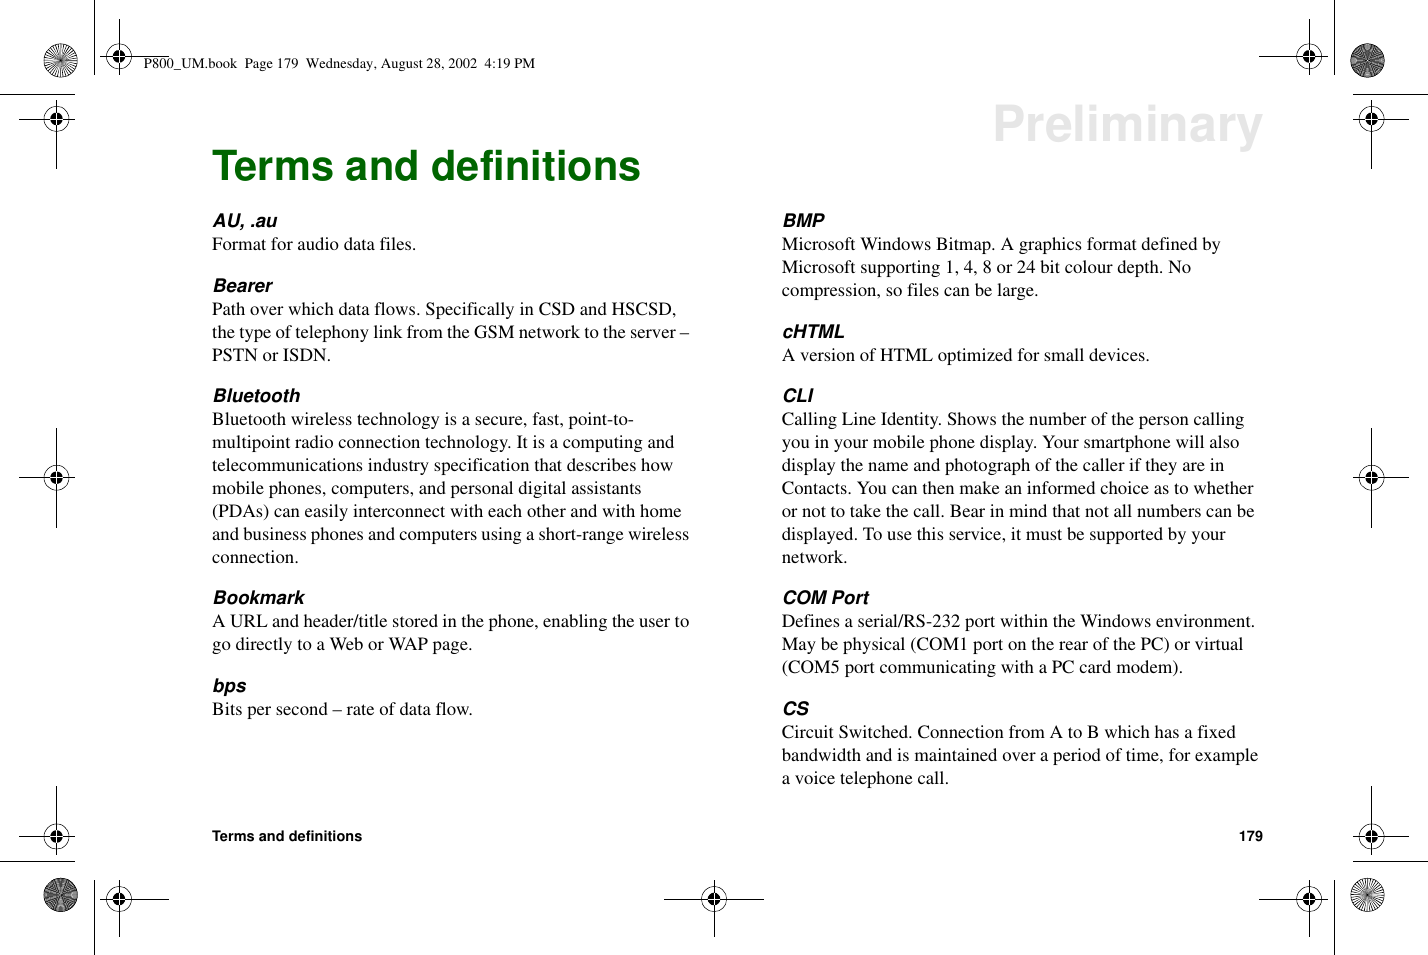 Terms and definitions 179PreliminaryTerms and definitionsAU, .auFormat for audio data files.BearerPath over which data flows. Specifically in CSD and HSCSD,the type of telephony link from the GSM network to the server –PSTN or ISDN.BluetoothBluetooth wireless technology is a secure, fast, point-to-multipoint radio connection technology. It is a computing andtelecommunications industry specification that describes howmobile phones, computers, and personal digital assistants(PDAs) can easily interconnect with each other and with homeand business phones and computers using a short-range wirelessconnection.BookmarkA URL and header/title stored in the phone, enabling the user togo directly to a Web or WAP page.bpsBits per second – rate of data flow.BMPMicrosoft Windows Bitmap. A graphics format defined byMicrosoft supporting 1, 4, 8 or 24 bit colour depth. Nocompression, so files can be large.cHTMLA version of HTML optimized for small devices.CLICalling Line Identity. Shows the number of the person callingyou in your mobile phone display. Your smartphone will alsodisplay the name and photograph of the caller if they are inContacts. You can then make an informed choice as to whetheror not to take the call. Bear in mind that not all numbers can bedisplayed. To use this service, it must be supported by yournetwork.COM PortDefines a serial/RS-232 port within the Windows environment.May be physical (COM1 port on the rear of the PC) or virtual(COM5 port communicating with a PC card modem).CSCircuit Switched. Connection from A to B which has a fixedbandwidth and is maintained over a period of time, for examplea voice telephone call.P800_UM.book Page 179 Wednesday, August 28, 2002 4:19 PM